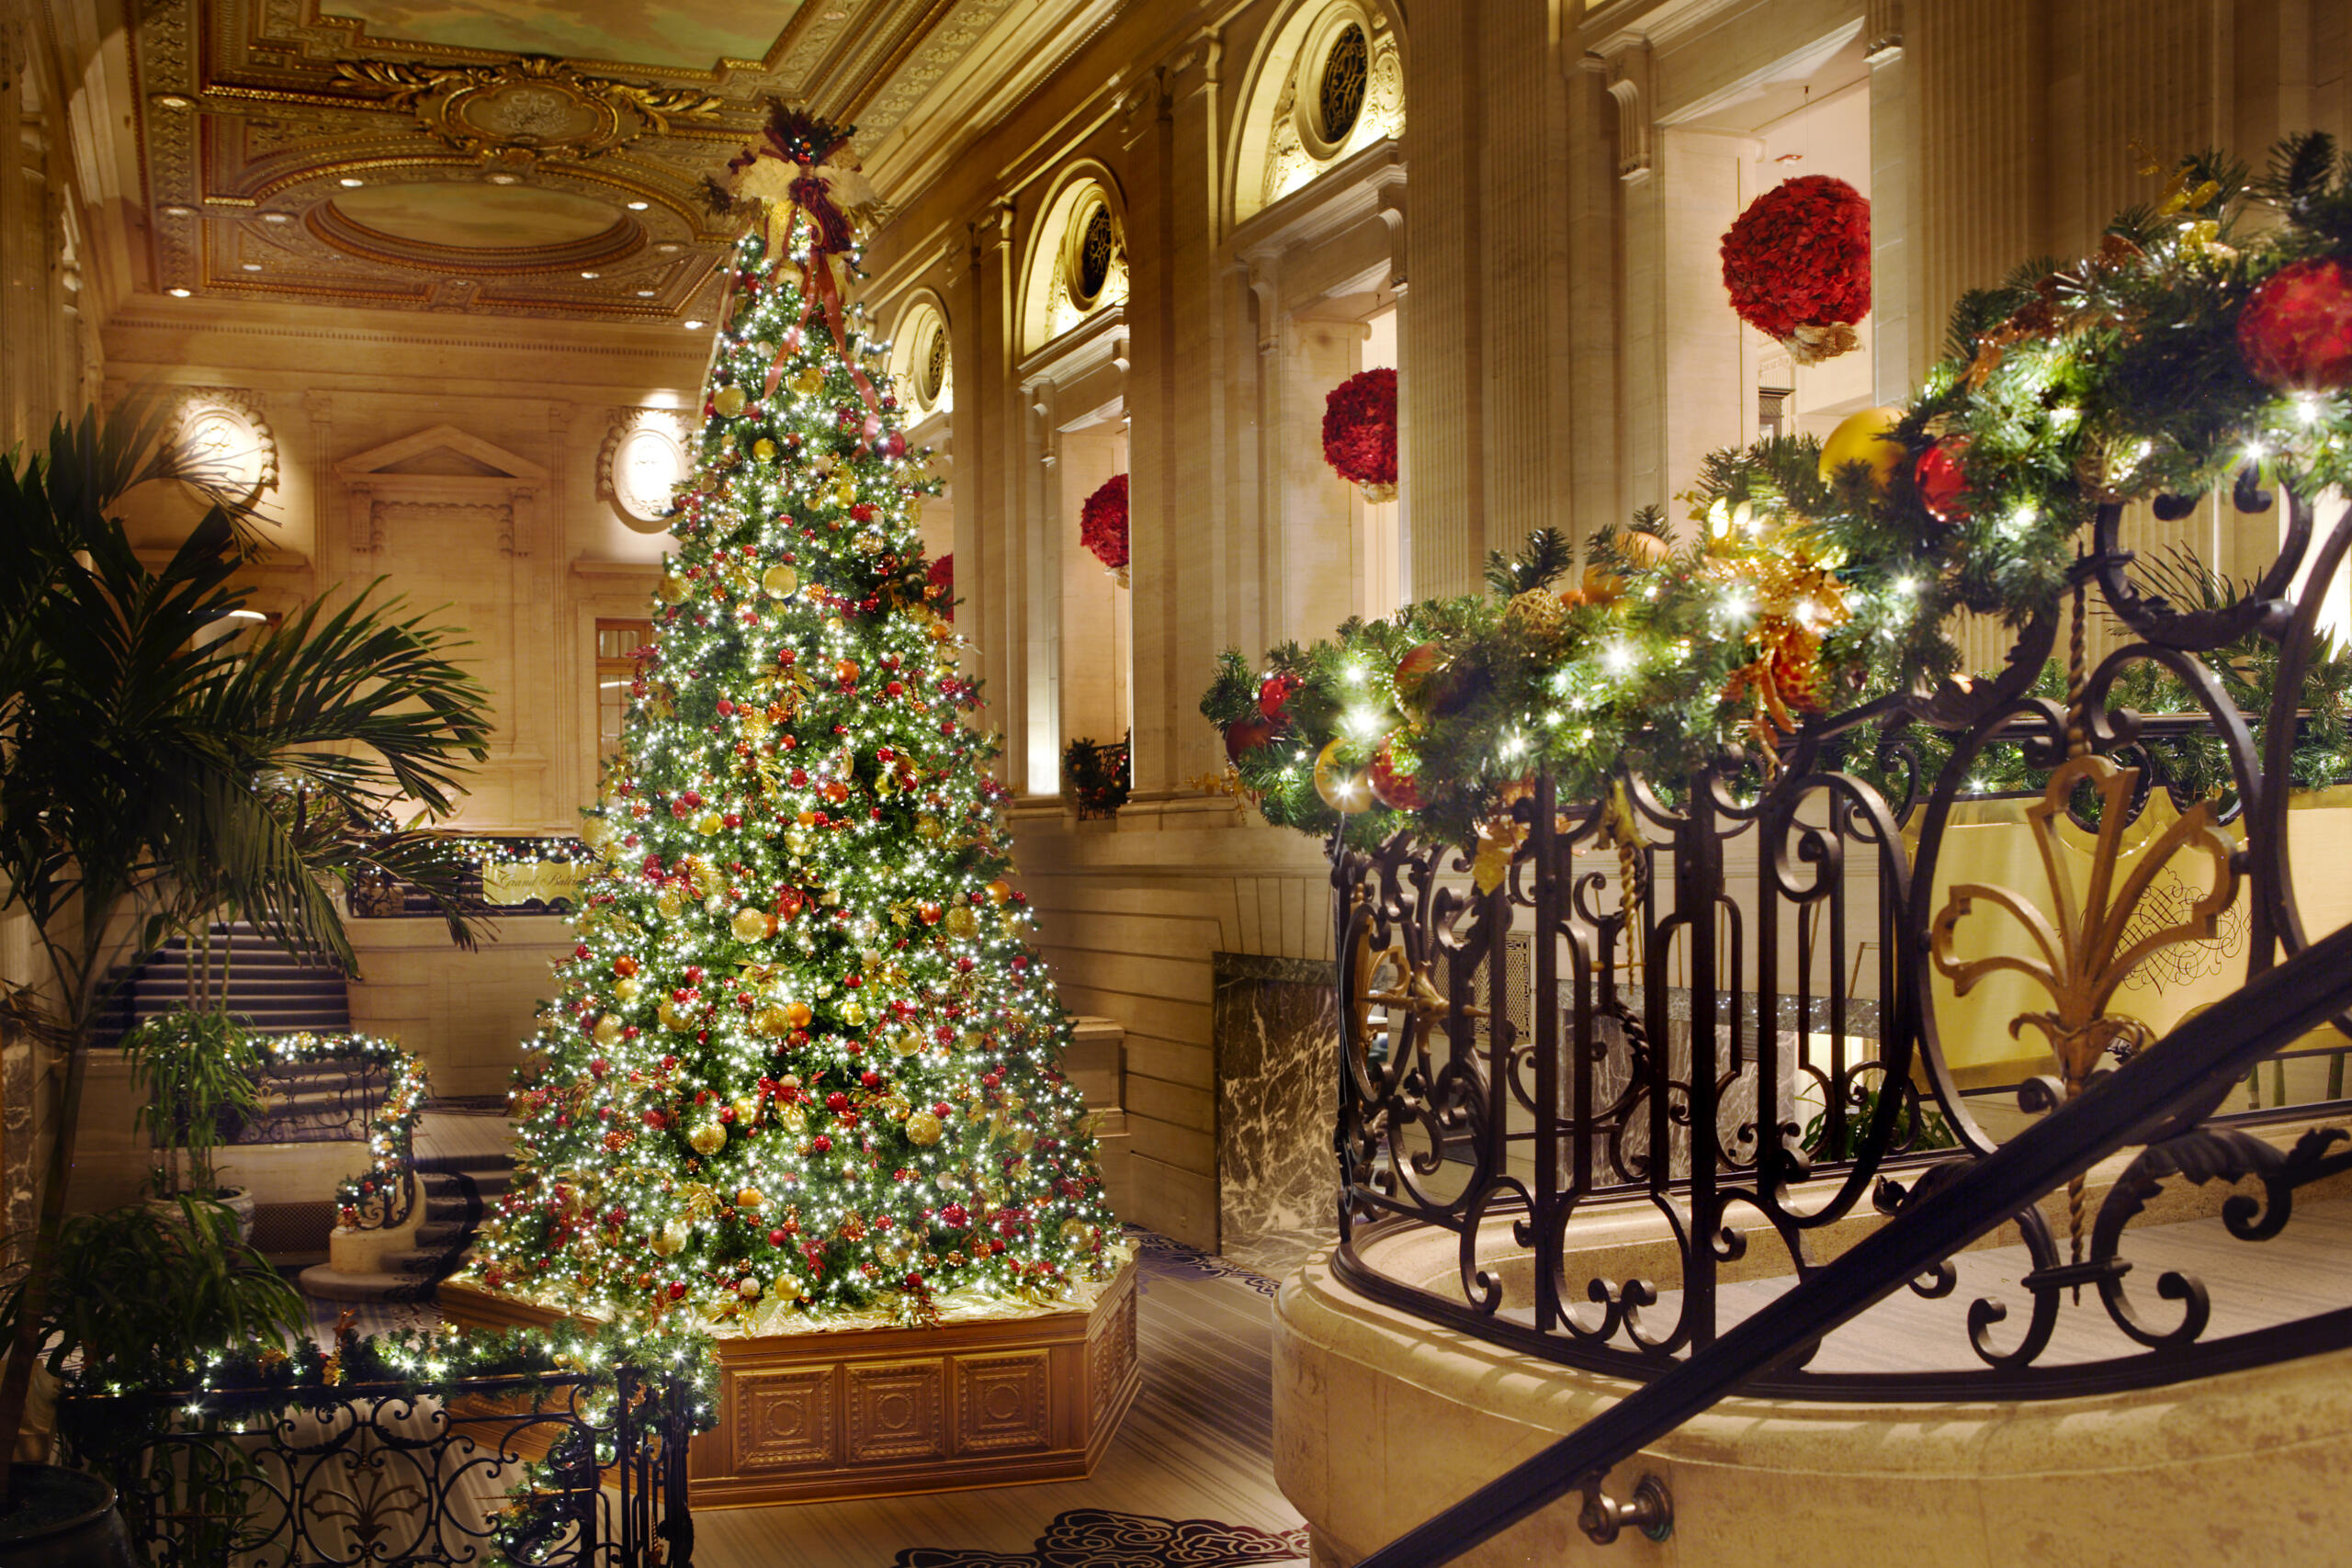 Plan your Chicago holiday getaway at these festive Hilton hotels